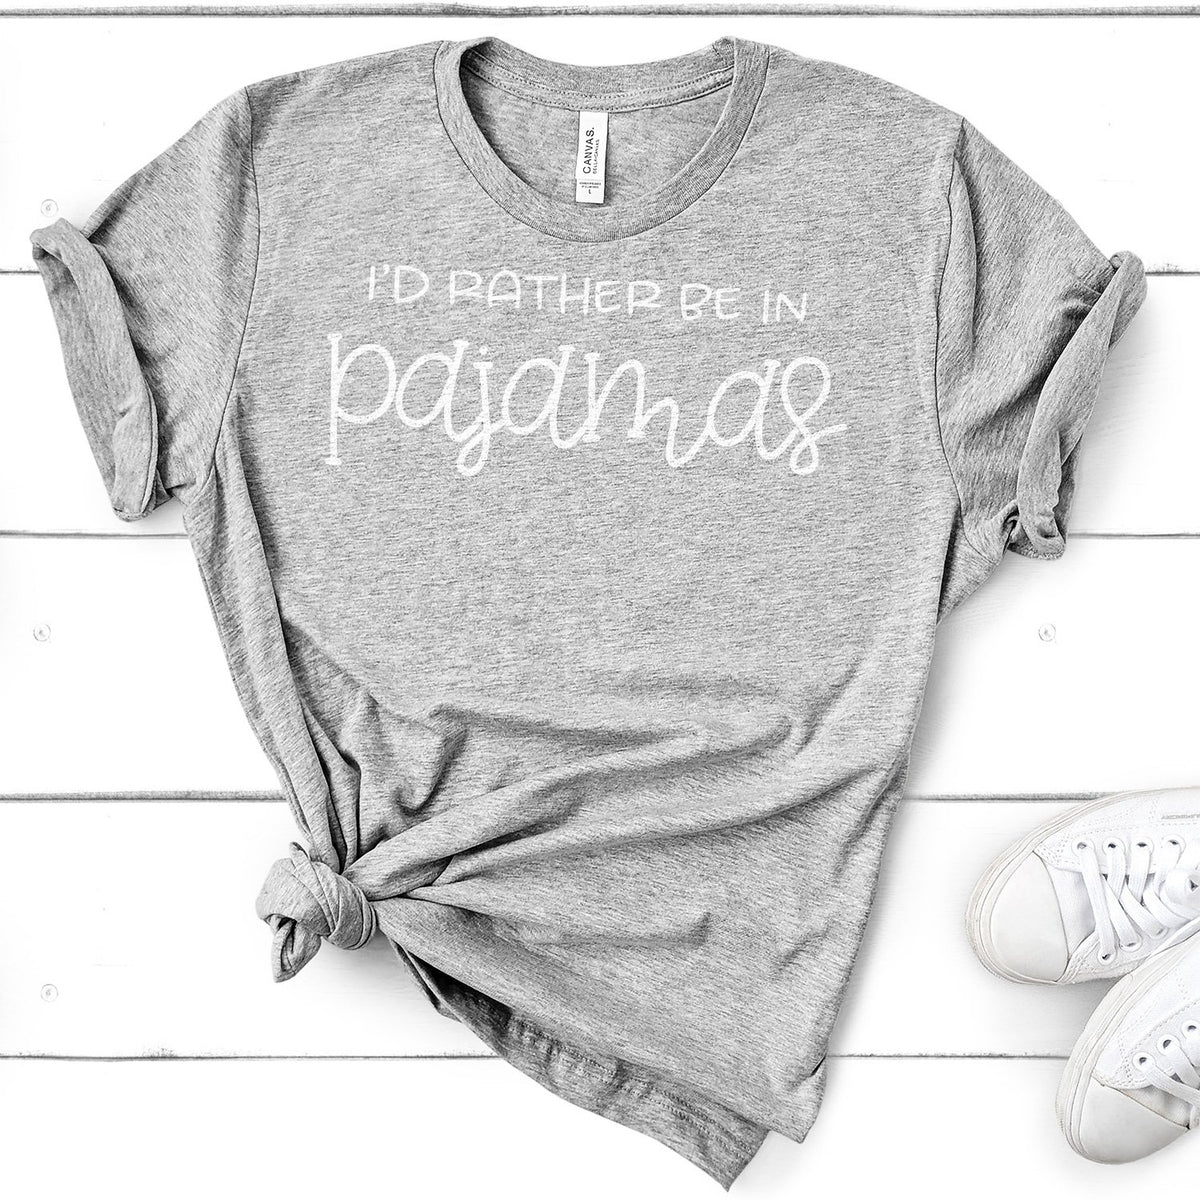 I&#39;d Rather Be in Pajamas - Short Sleeve Tee Shirt